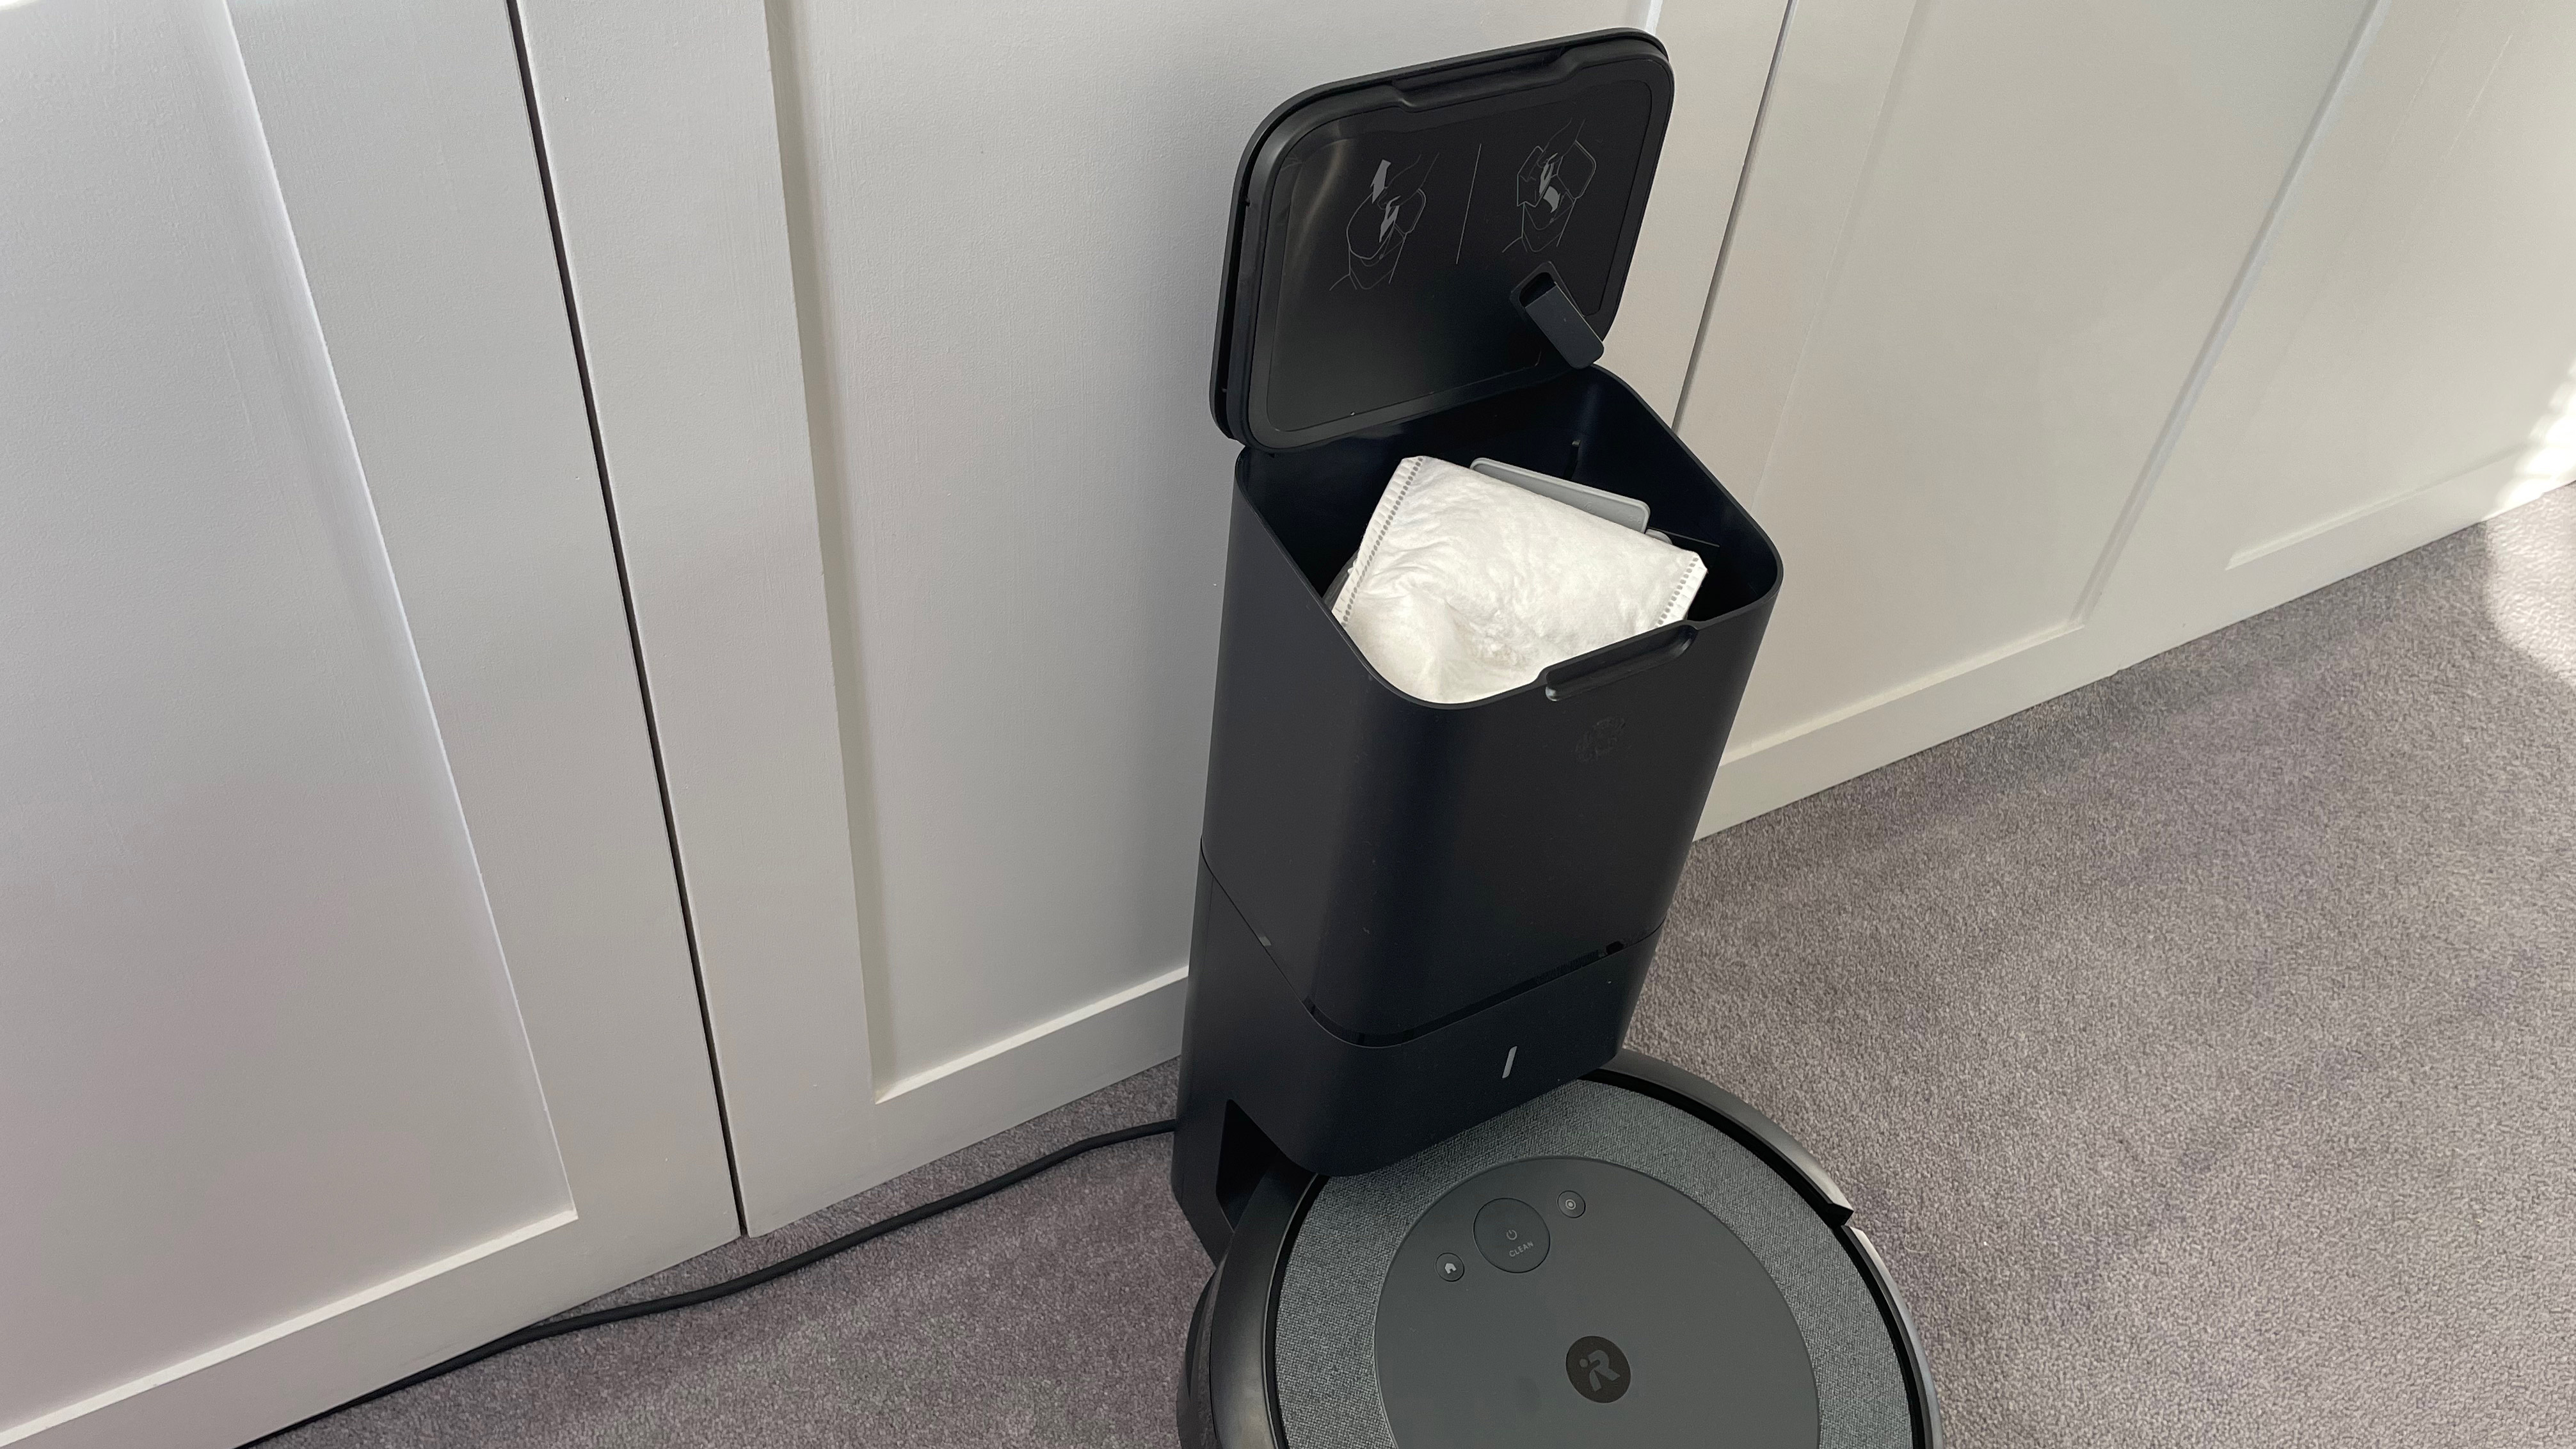 The self-emptying bin that comes with the iRobot Roomba i3 Plus